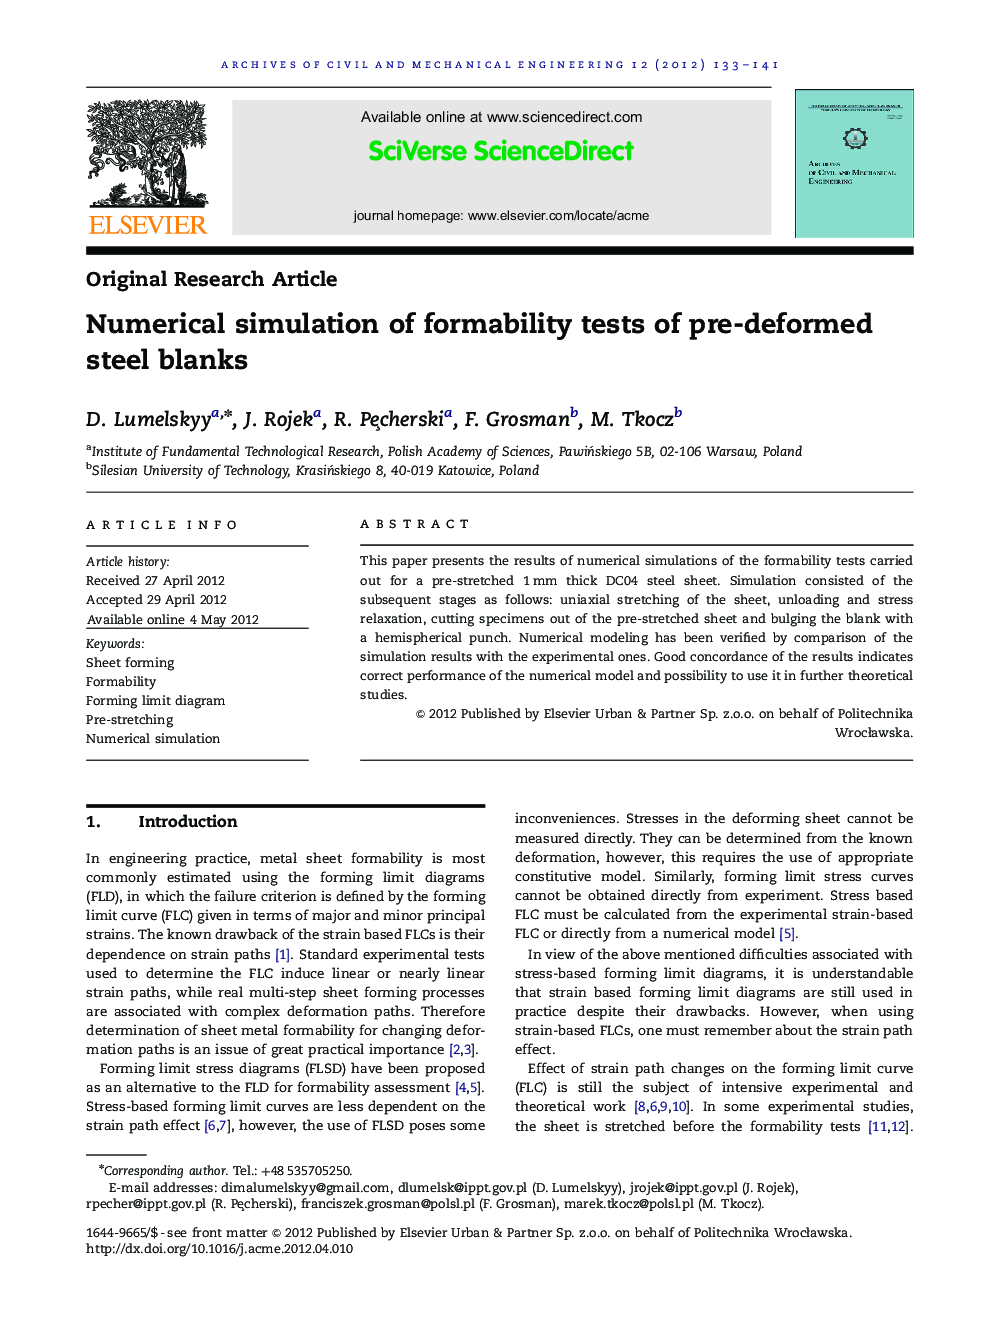 Numerical simulation of formability tests of pre-deformed steel blanks